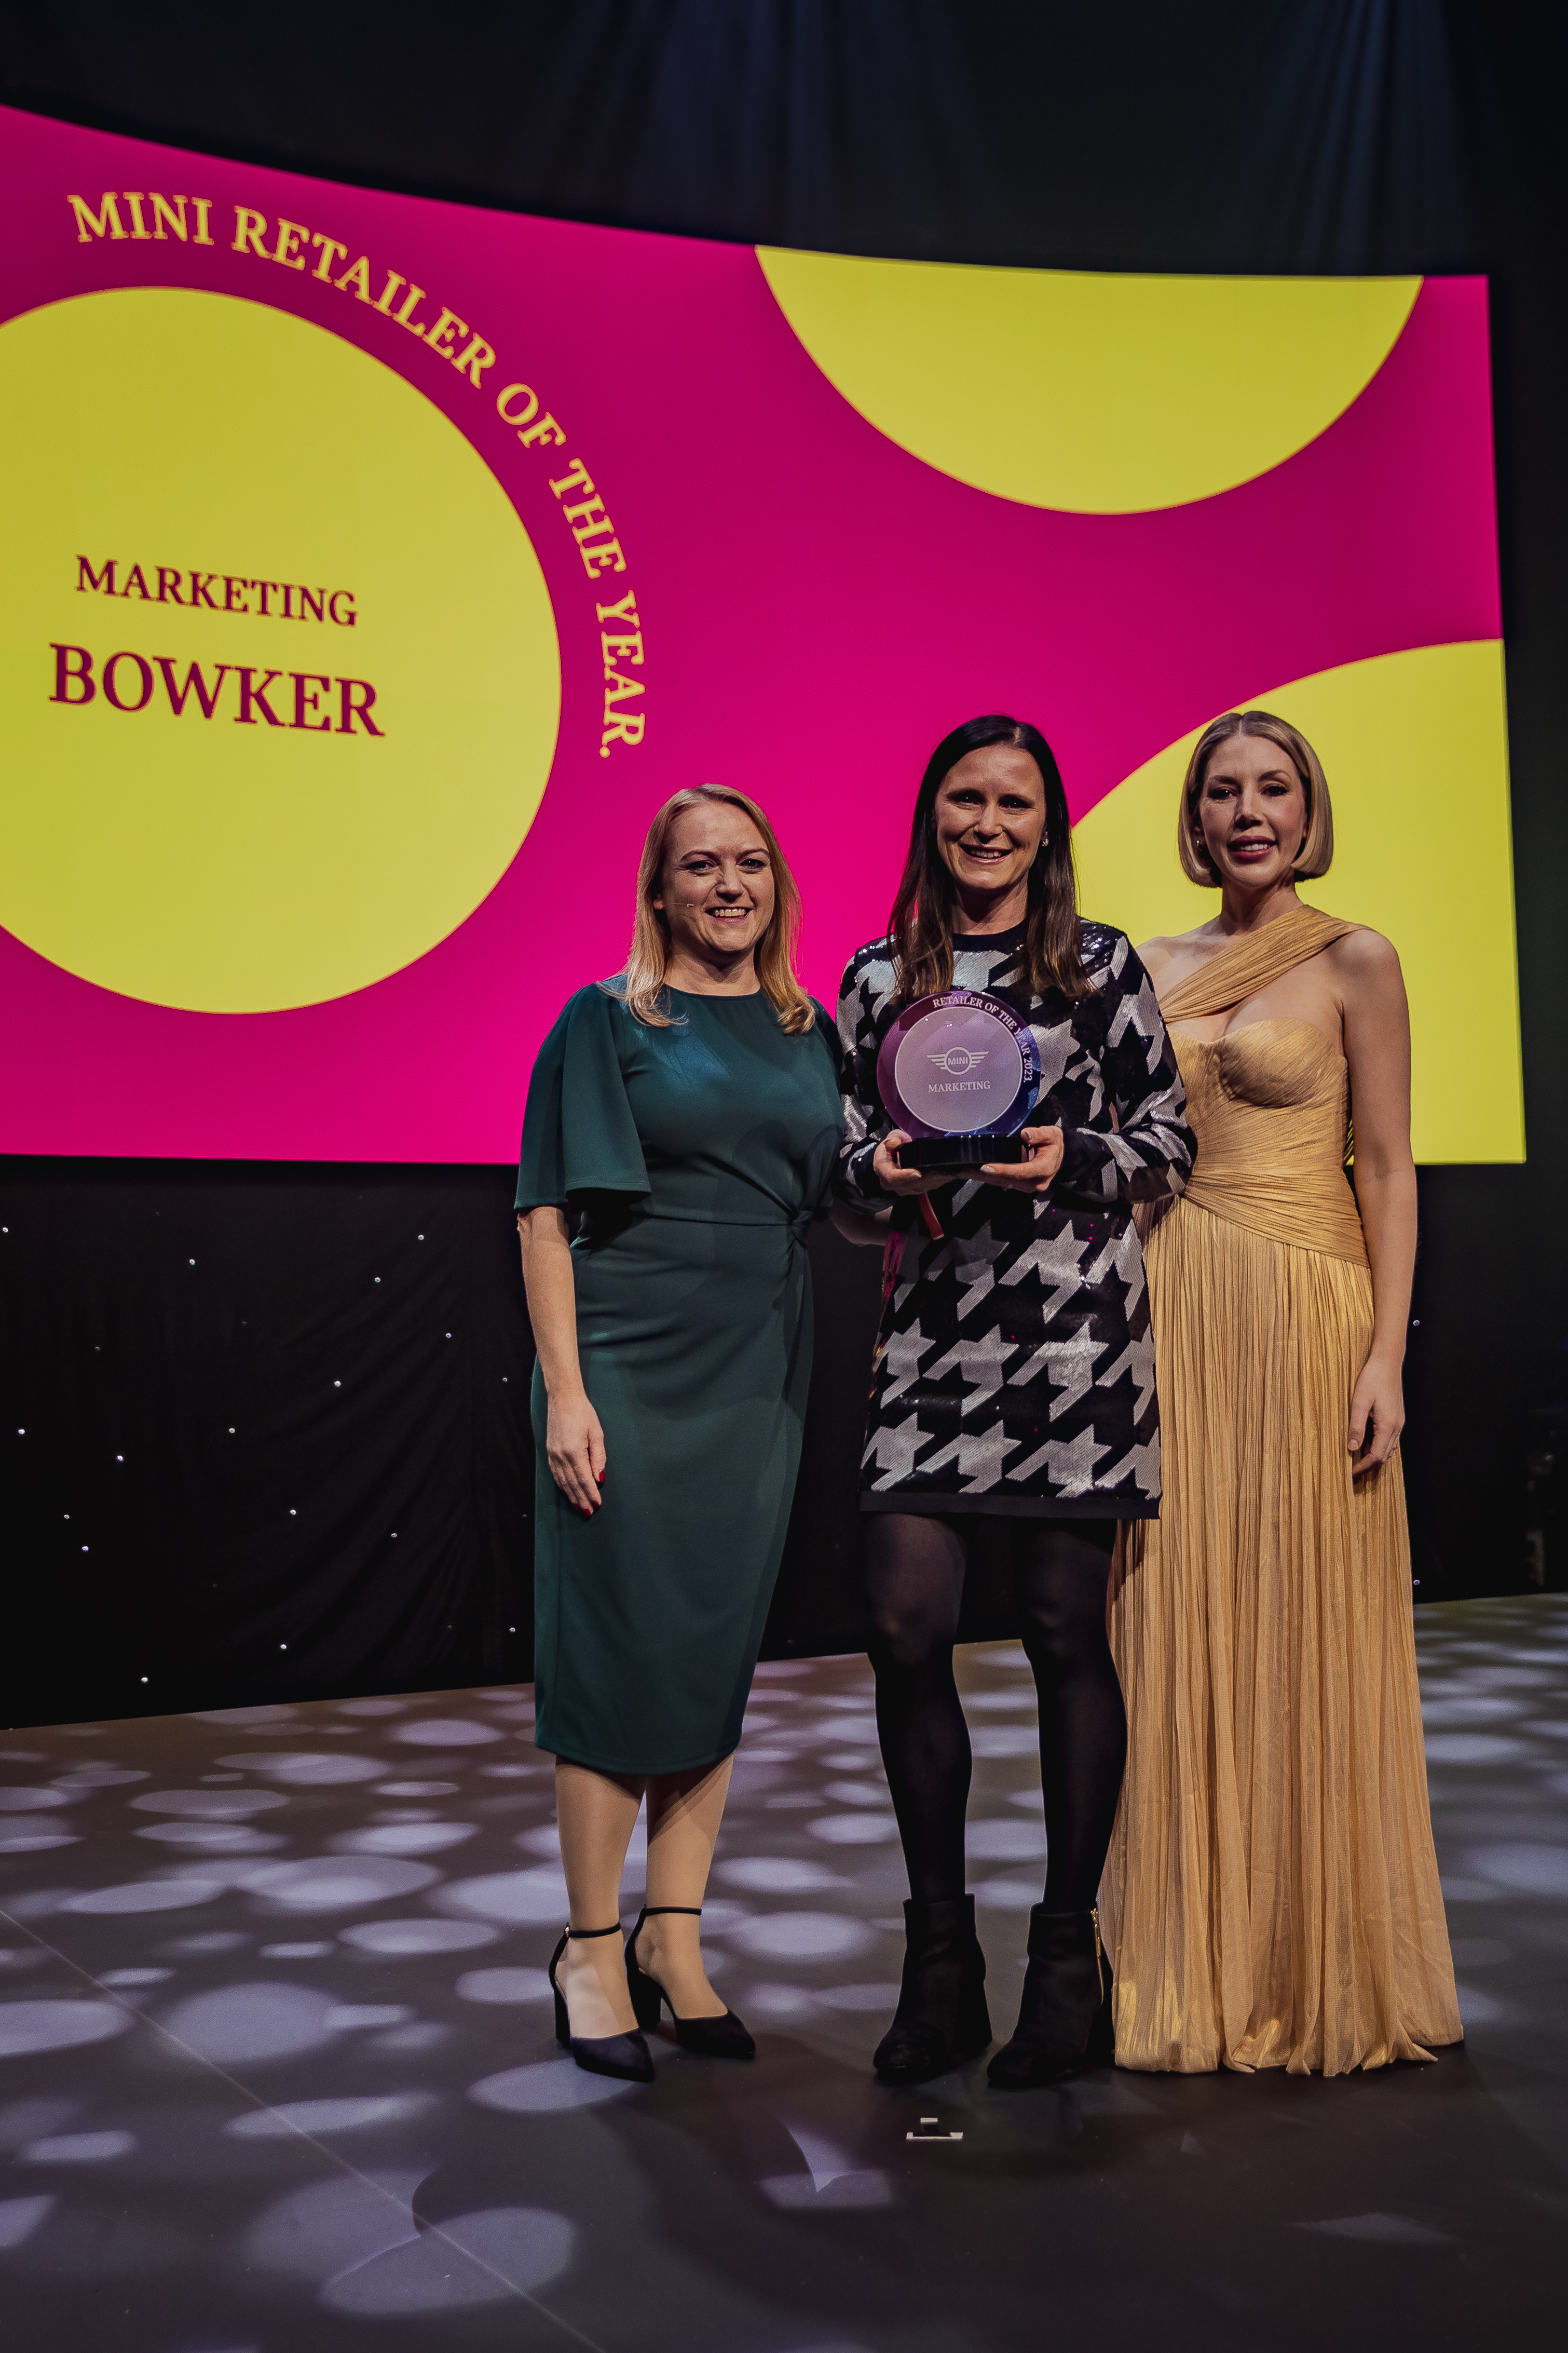 Bowker MINI Scoop Second National Marketing Accolade